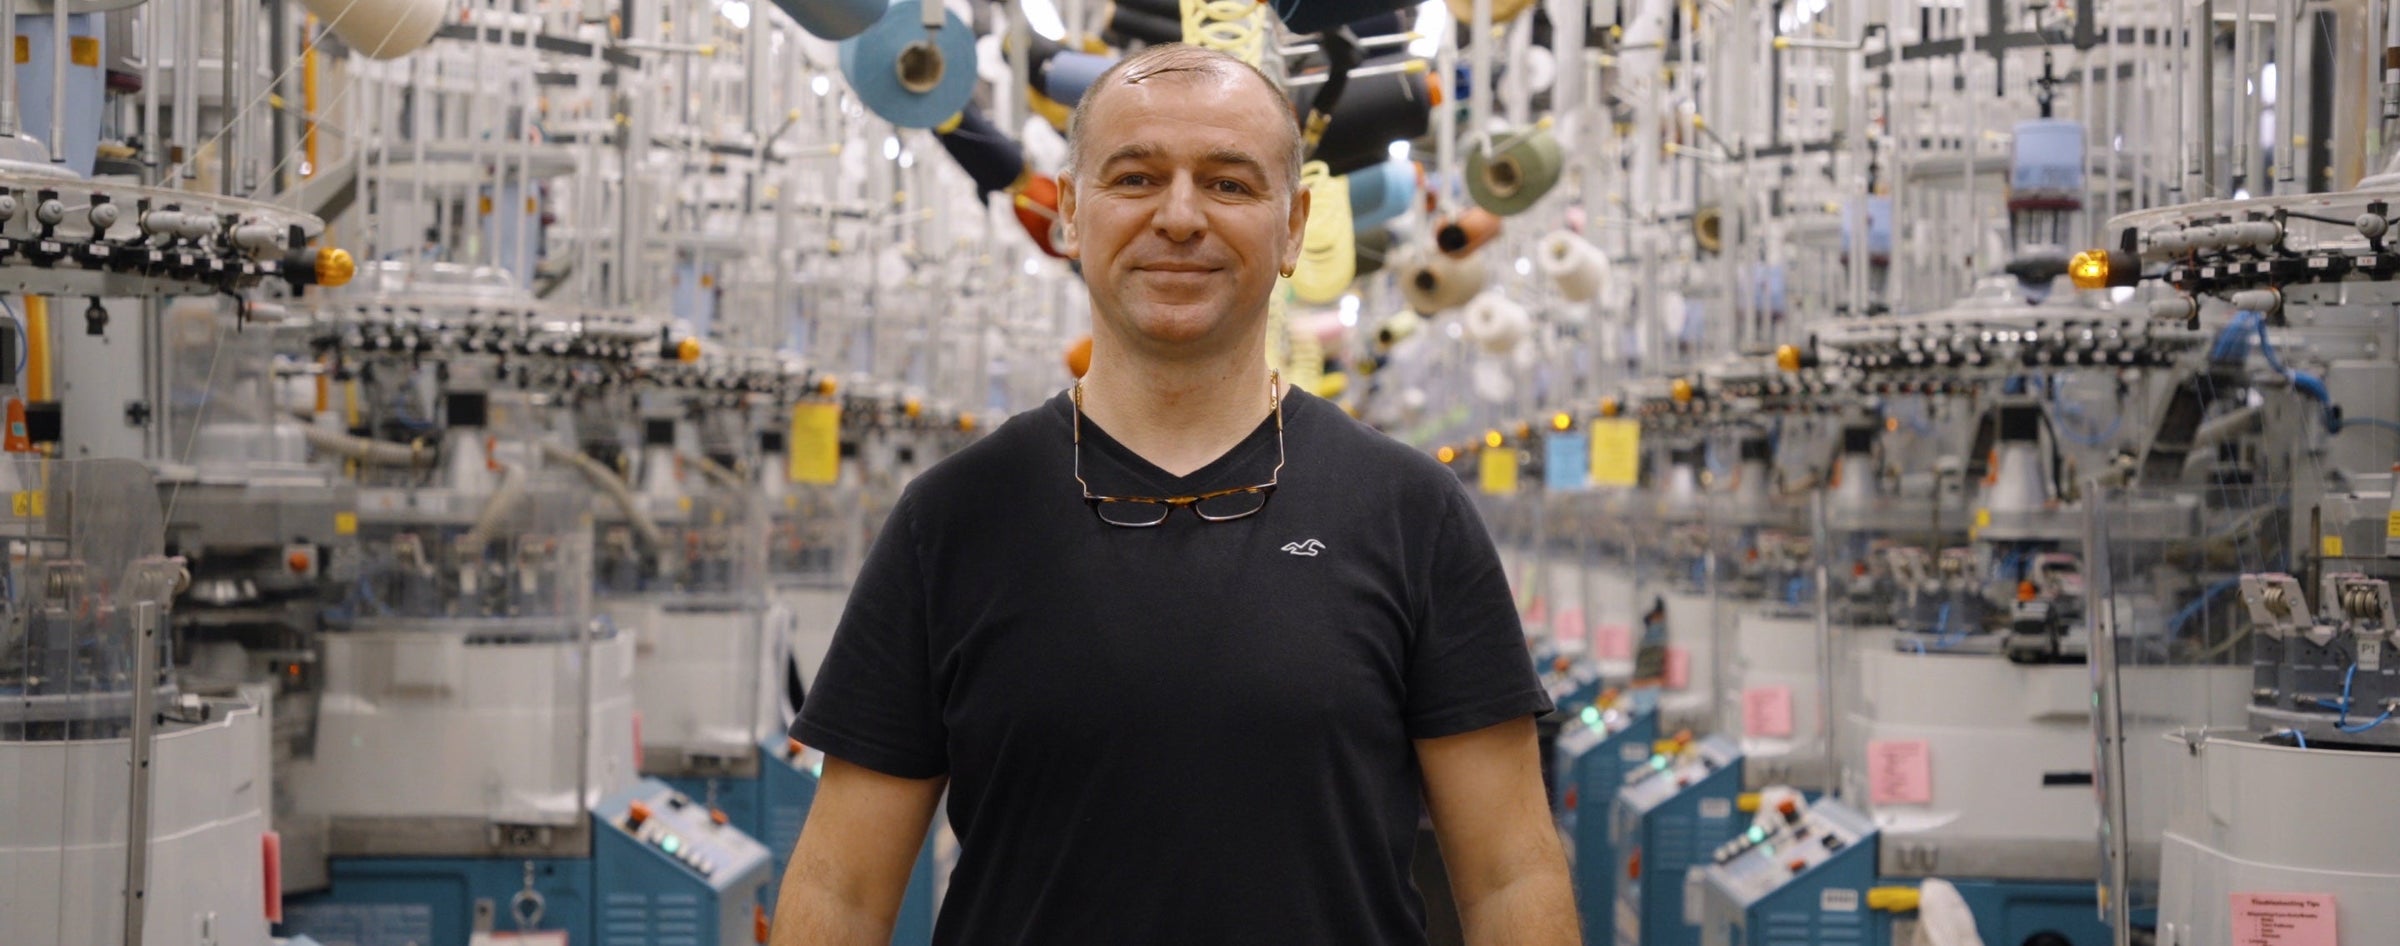 Wide cropped image of man standing on Darn Tough knitting floor with sock knitting machines on either side of him.